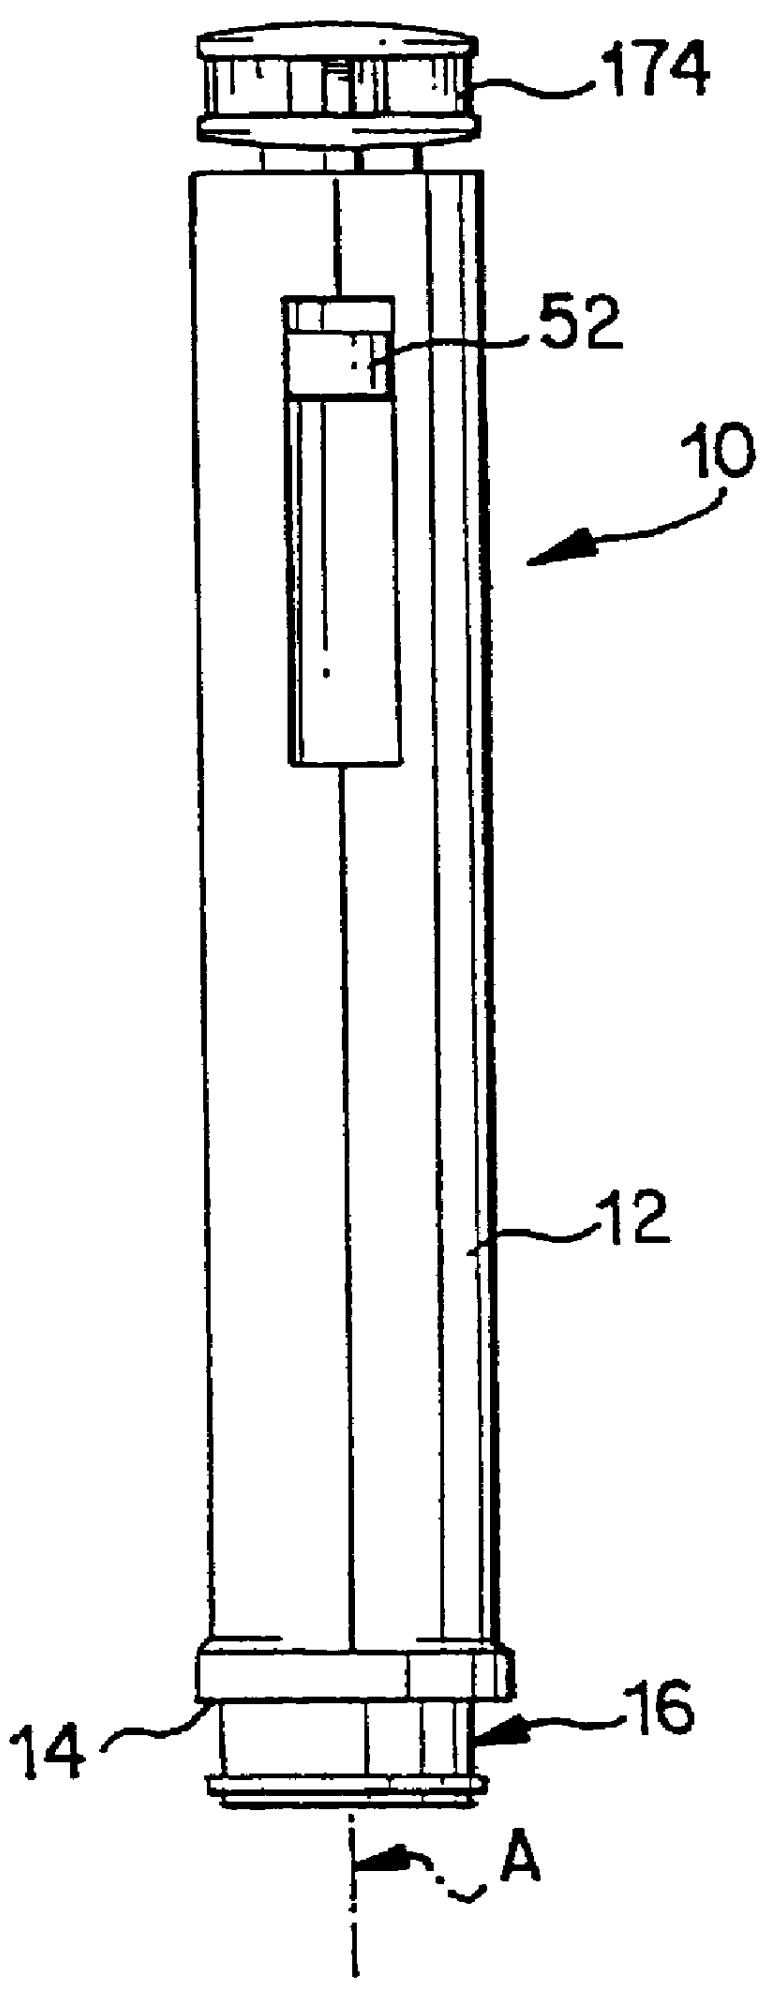 Body fluid sampling device and methods of use